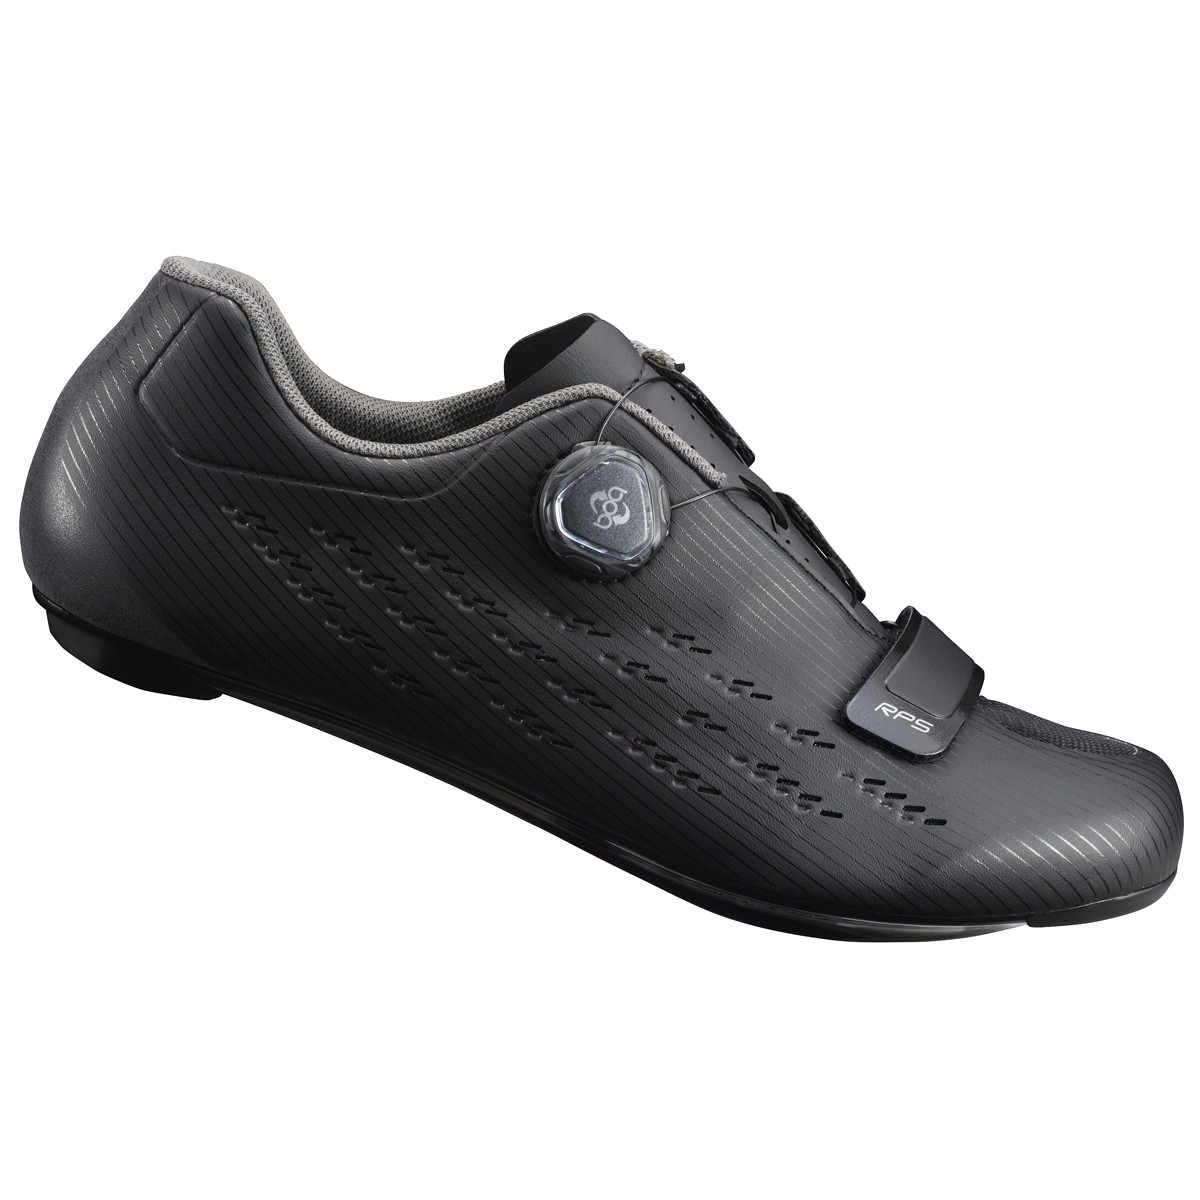 Shimano rp501 chaussures route noir